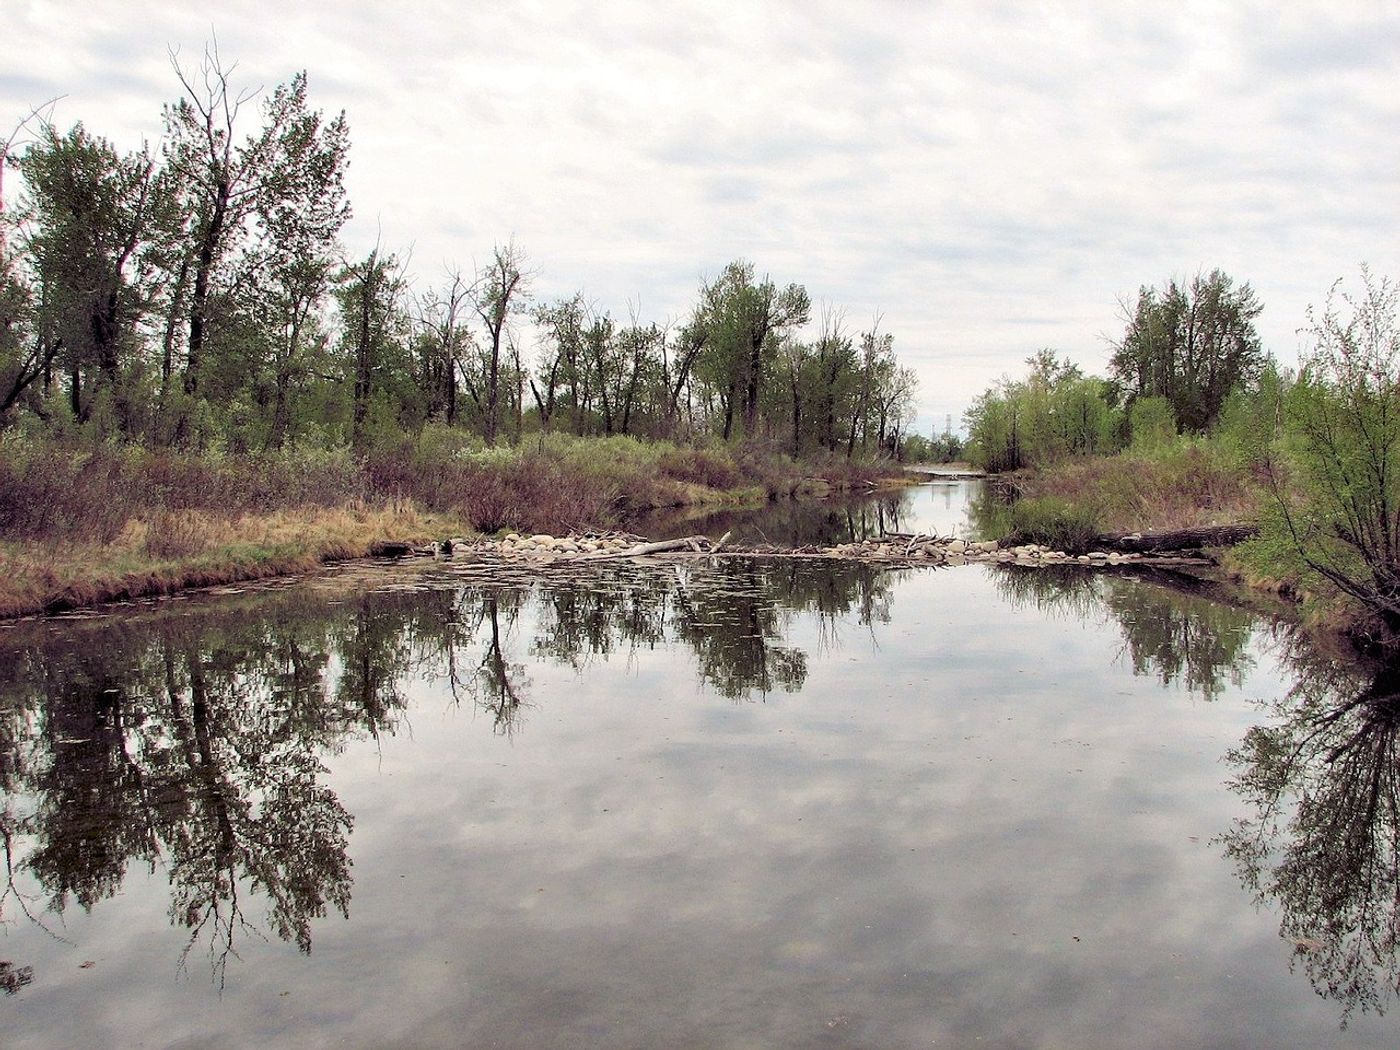 Beaver dams may remove unwanted pollutants from rivers and streams.